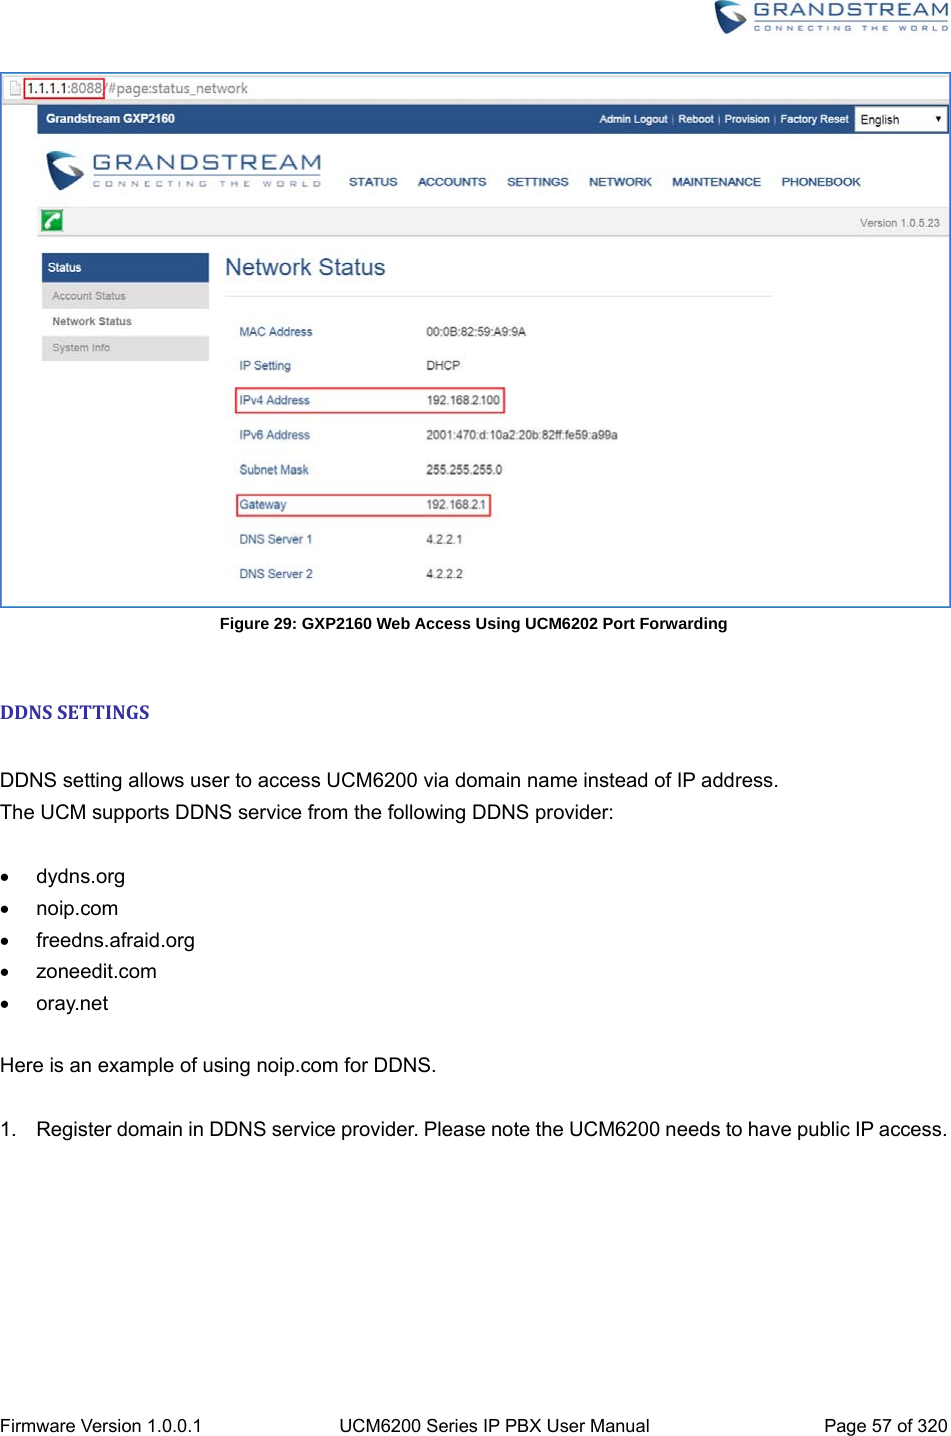  Firmware Version 1.0.0.1  UCM6200 Series IP PBX User Manual  Page 57 of 320  Figure 29: GXP2160 Web Access Using UCM6202 Port Forwarding  DDNSSETTINGS DDNS setting allows user to access UCM6200 via domain name instead of IP address.   The UCM supports DDNS service from the following DDNS provider:   dydns.org  noip.com  freedns.afraid.org  zoneedit.com  oray.net  Here is an example of using noip.com for DDNS.  1.  Register domain in DDNS service provider. Please note the UCM6200 needs to have public IP access. 